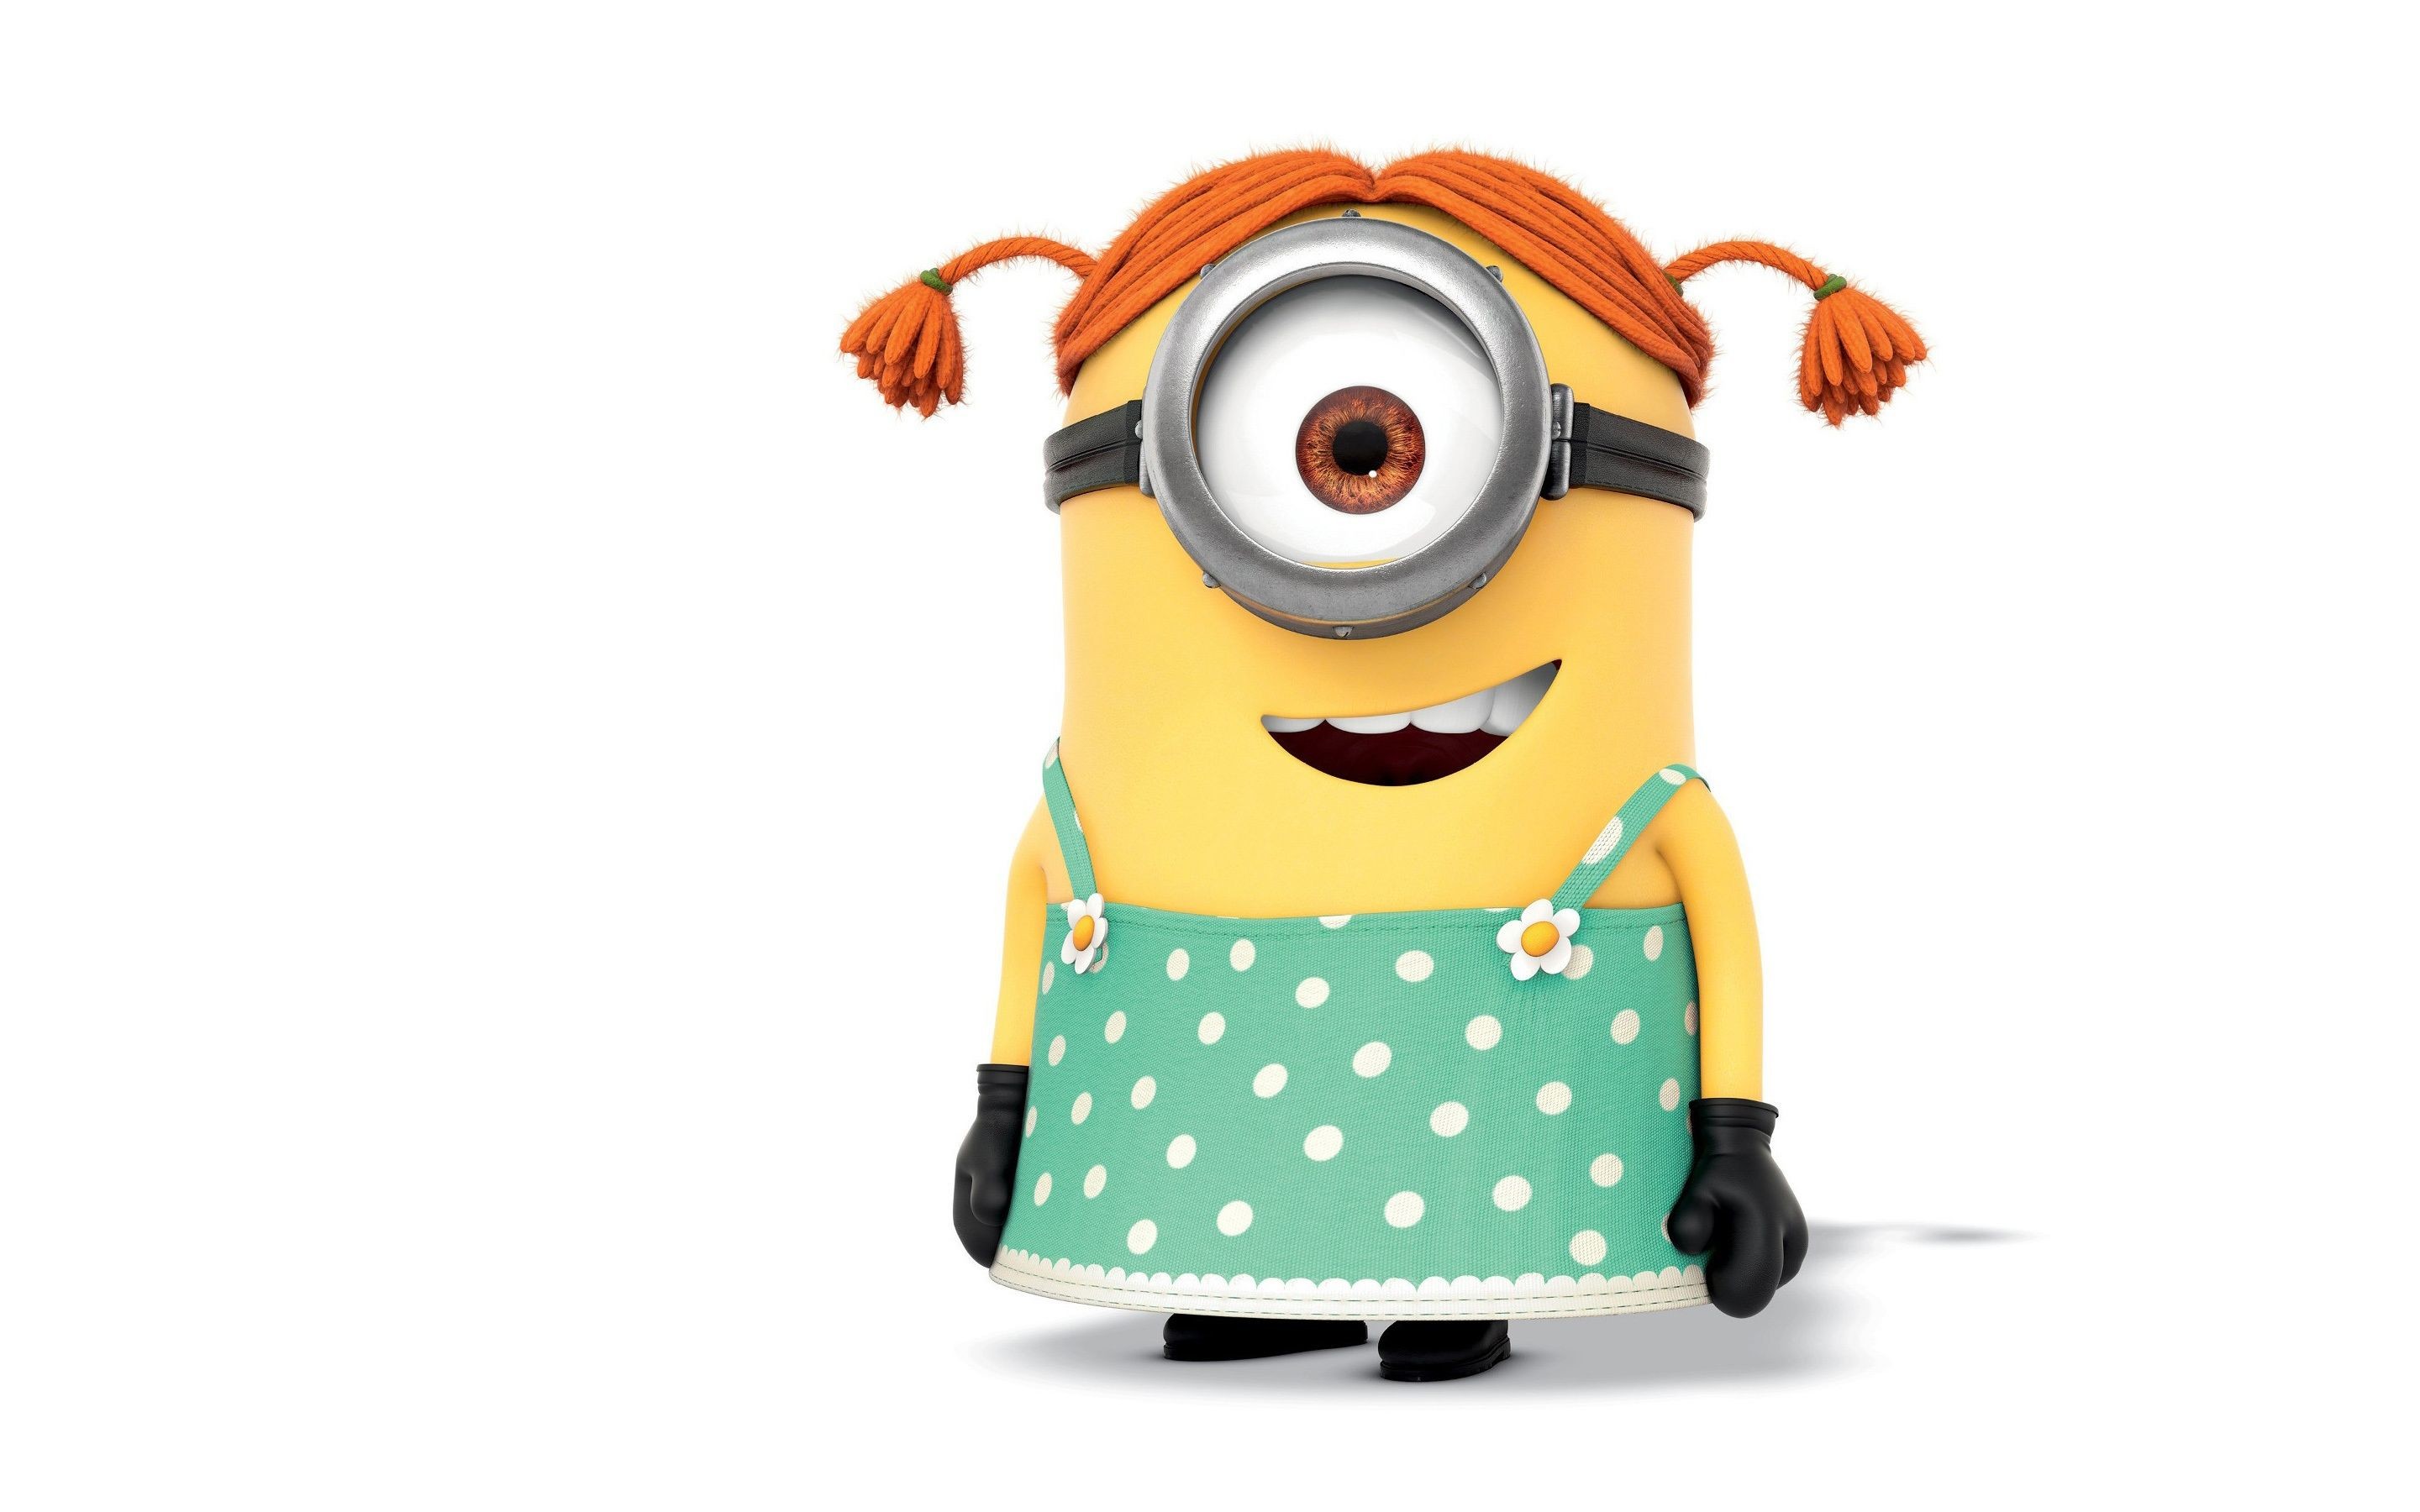 Download Hd Minion Wallpapers For Mobile Phones - Cute Minions - 2880x1800  Wallpaper 